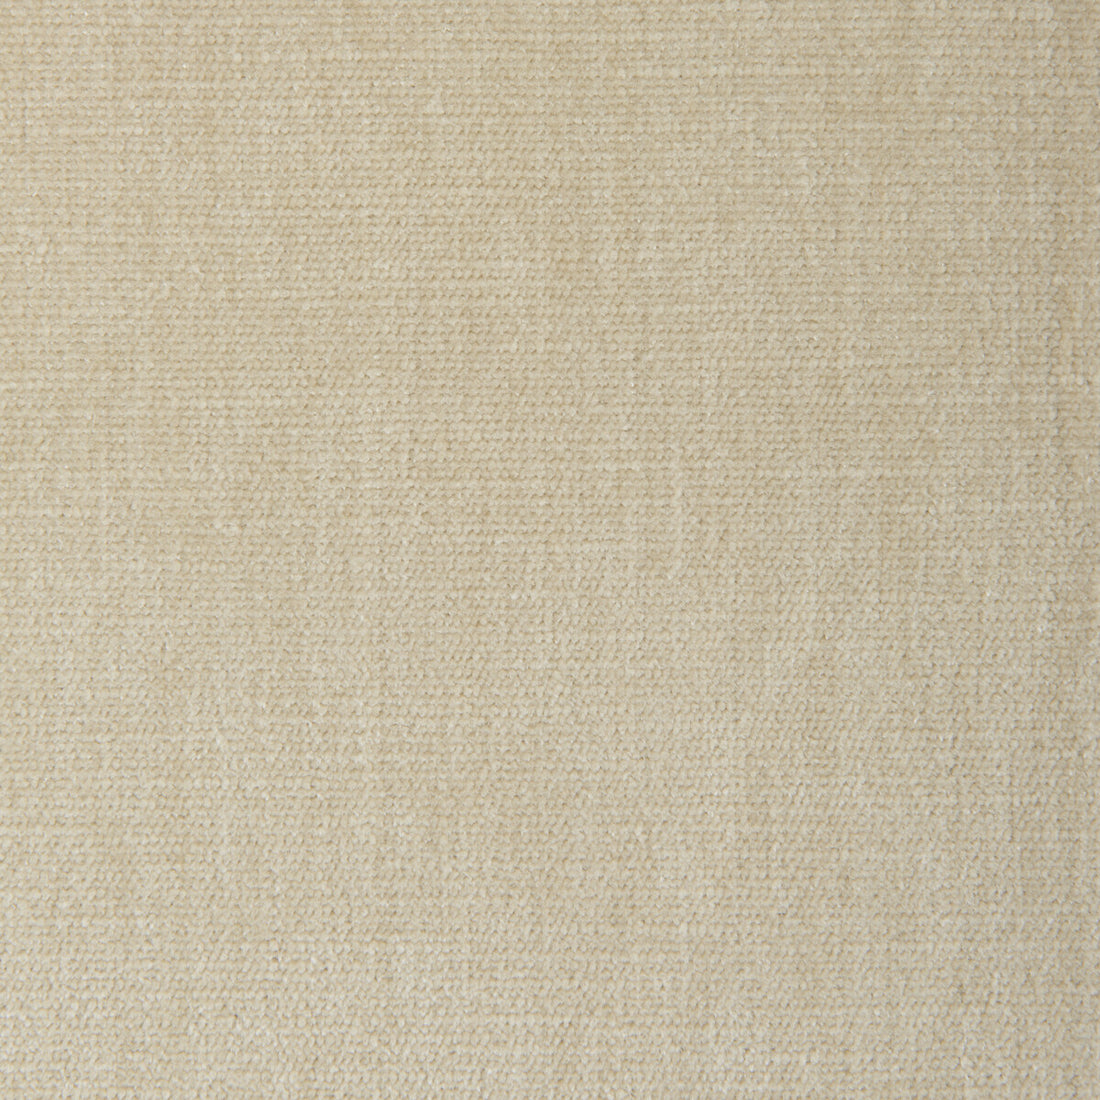 Kravet Smart fabric in 36076-1601 color - pattern 36076.1601.0 - by Kravet Smart in the Sumptuous Chenille II collection